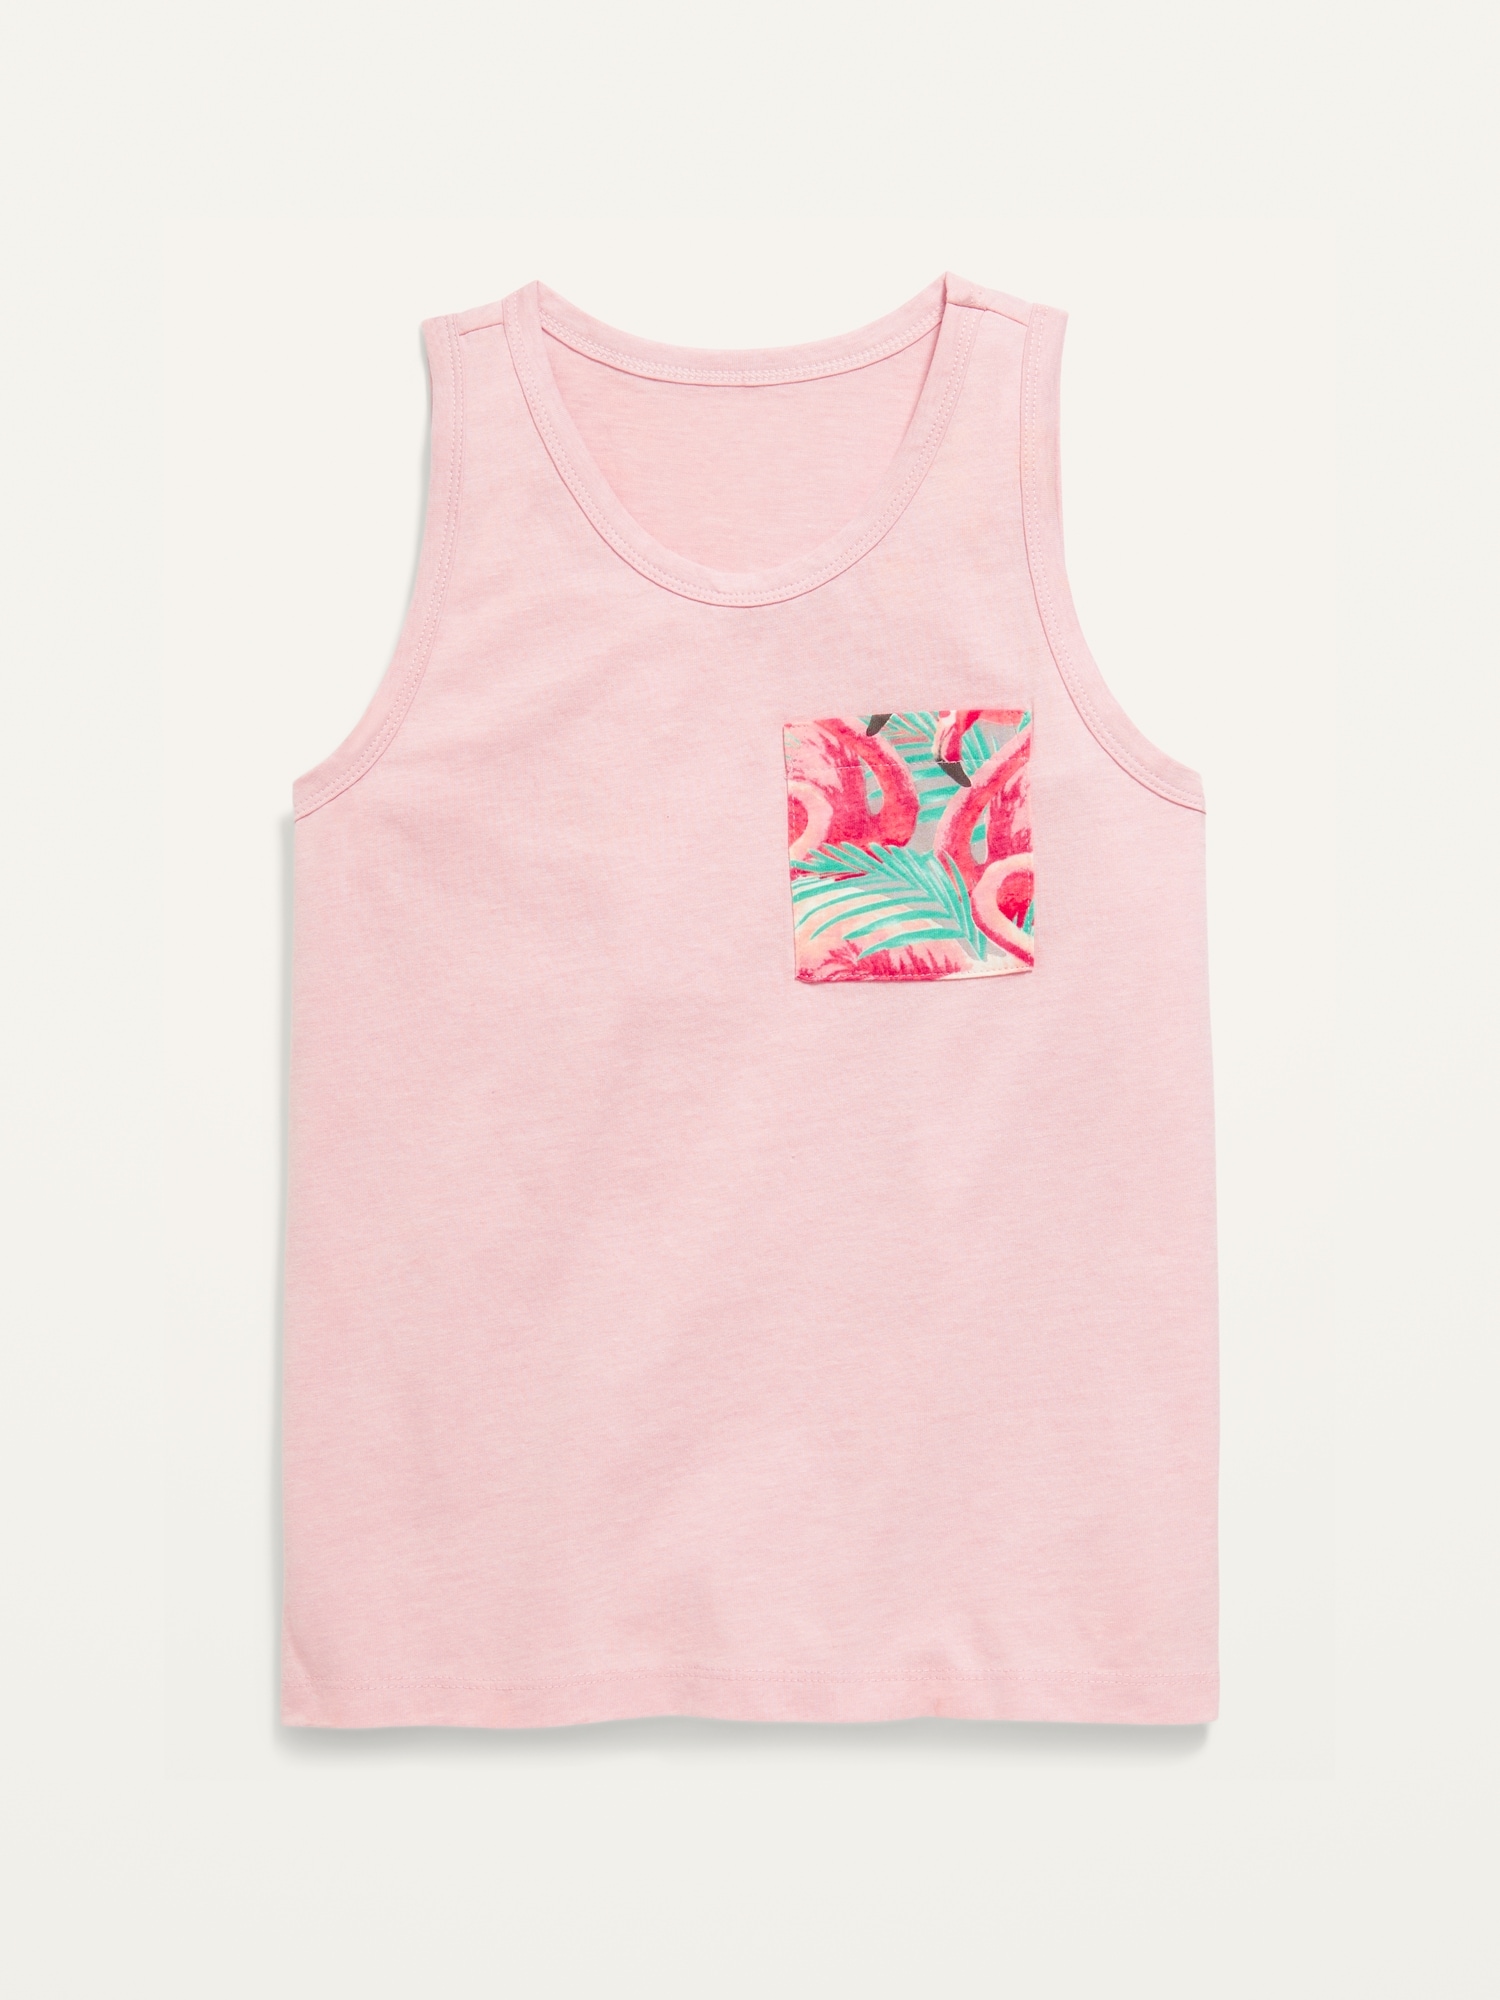 Old Navy Softest Printed Pocket Tank Top for Boys pink. 1